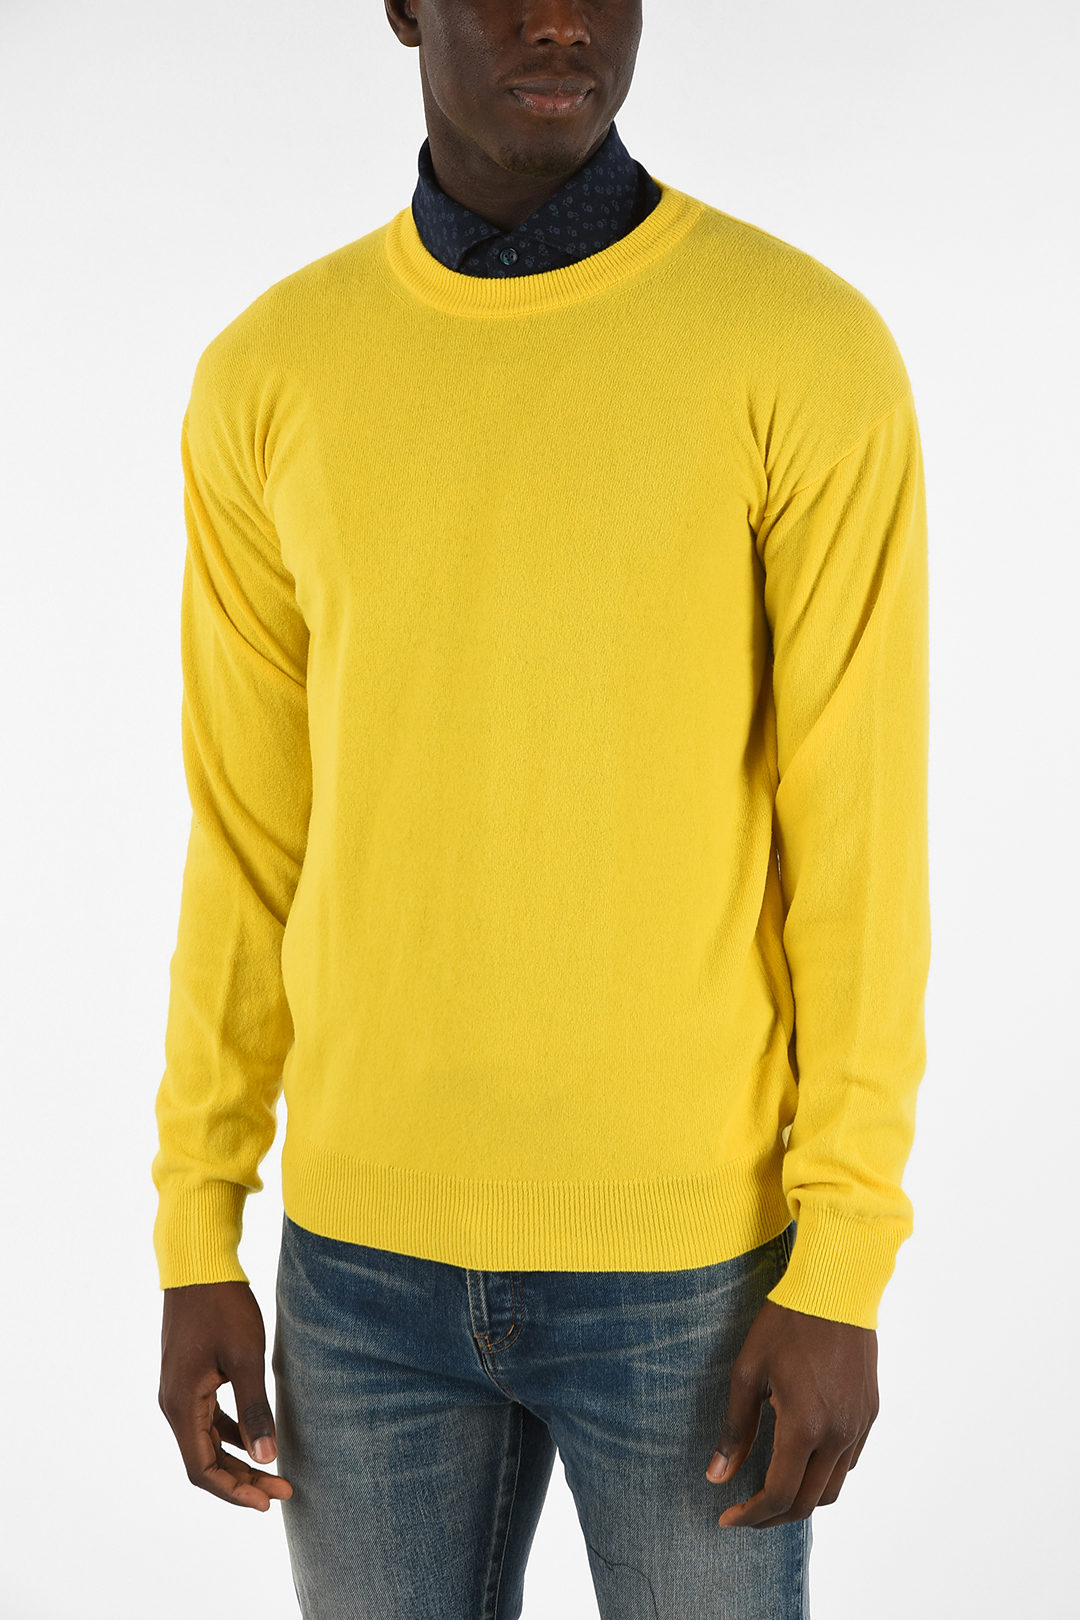 Calvin Klein Wool And Cashmere Crew-Neck Sweater men - Glamood Outlet